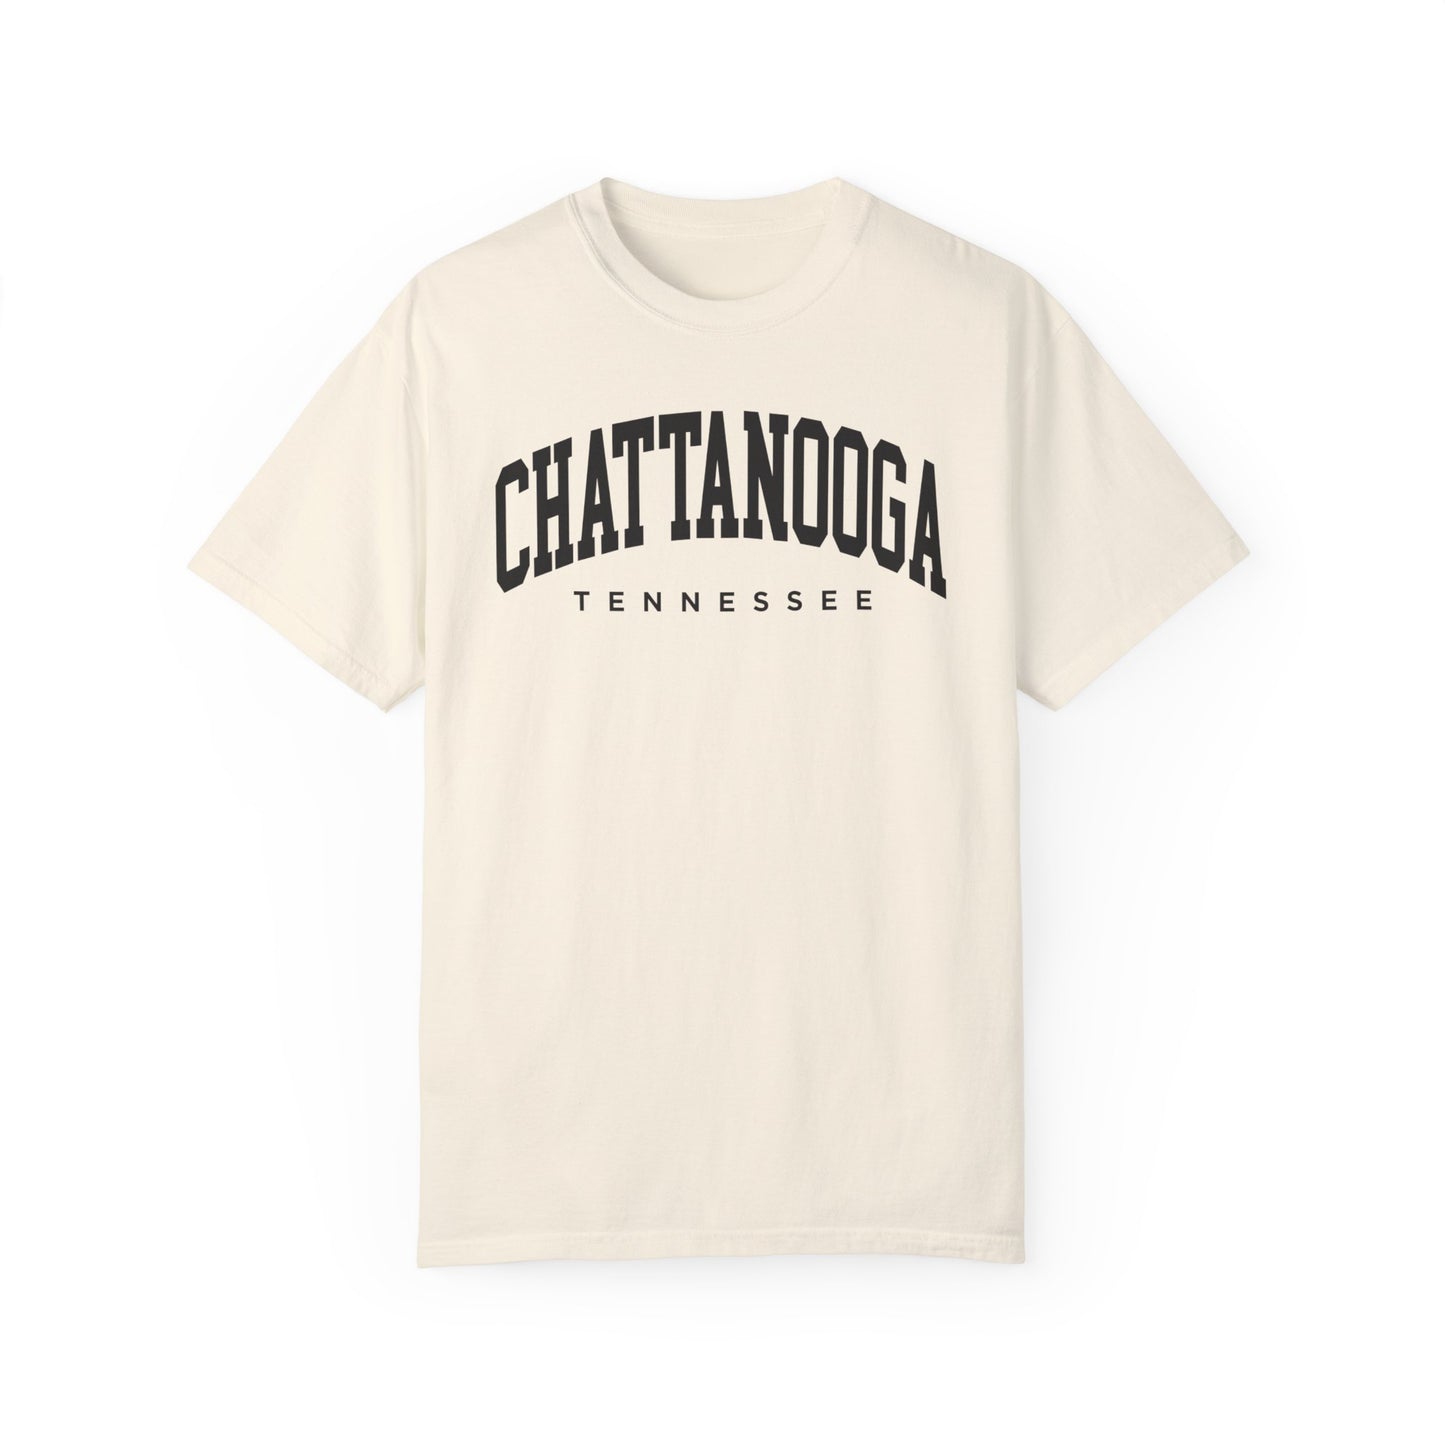 Chattanooga Tennessee Comfort Colors® Tee